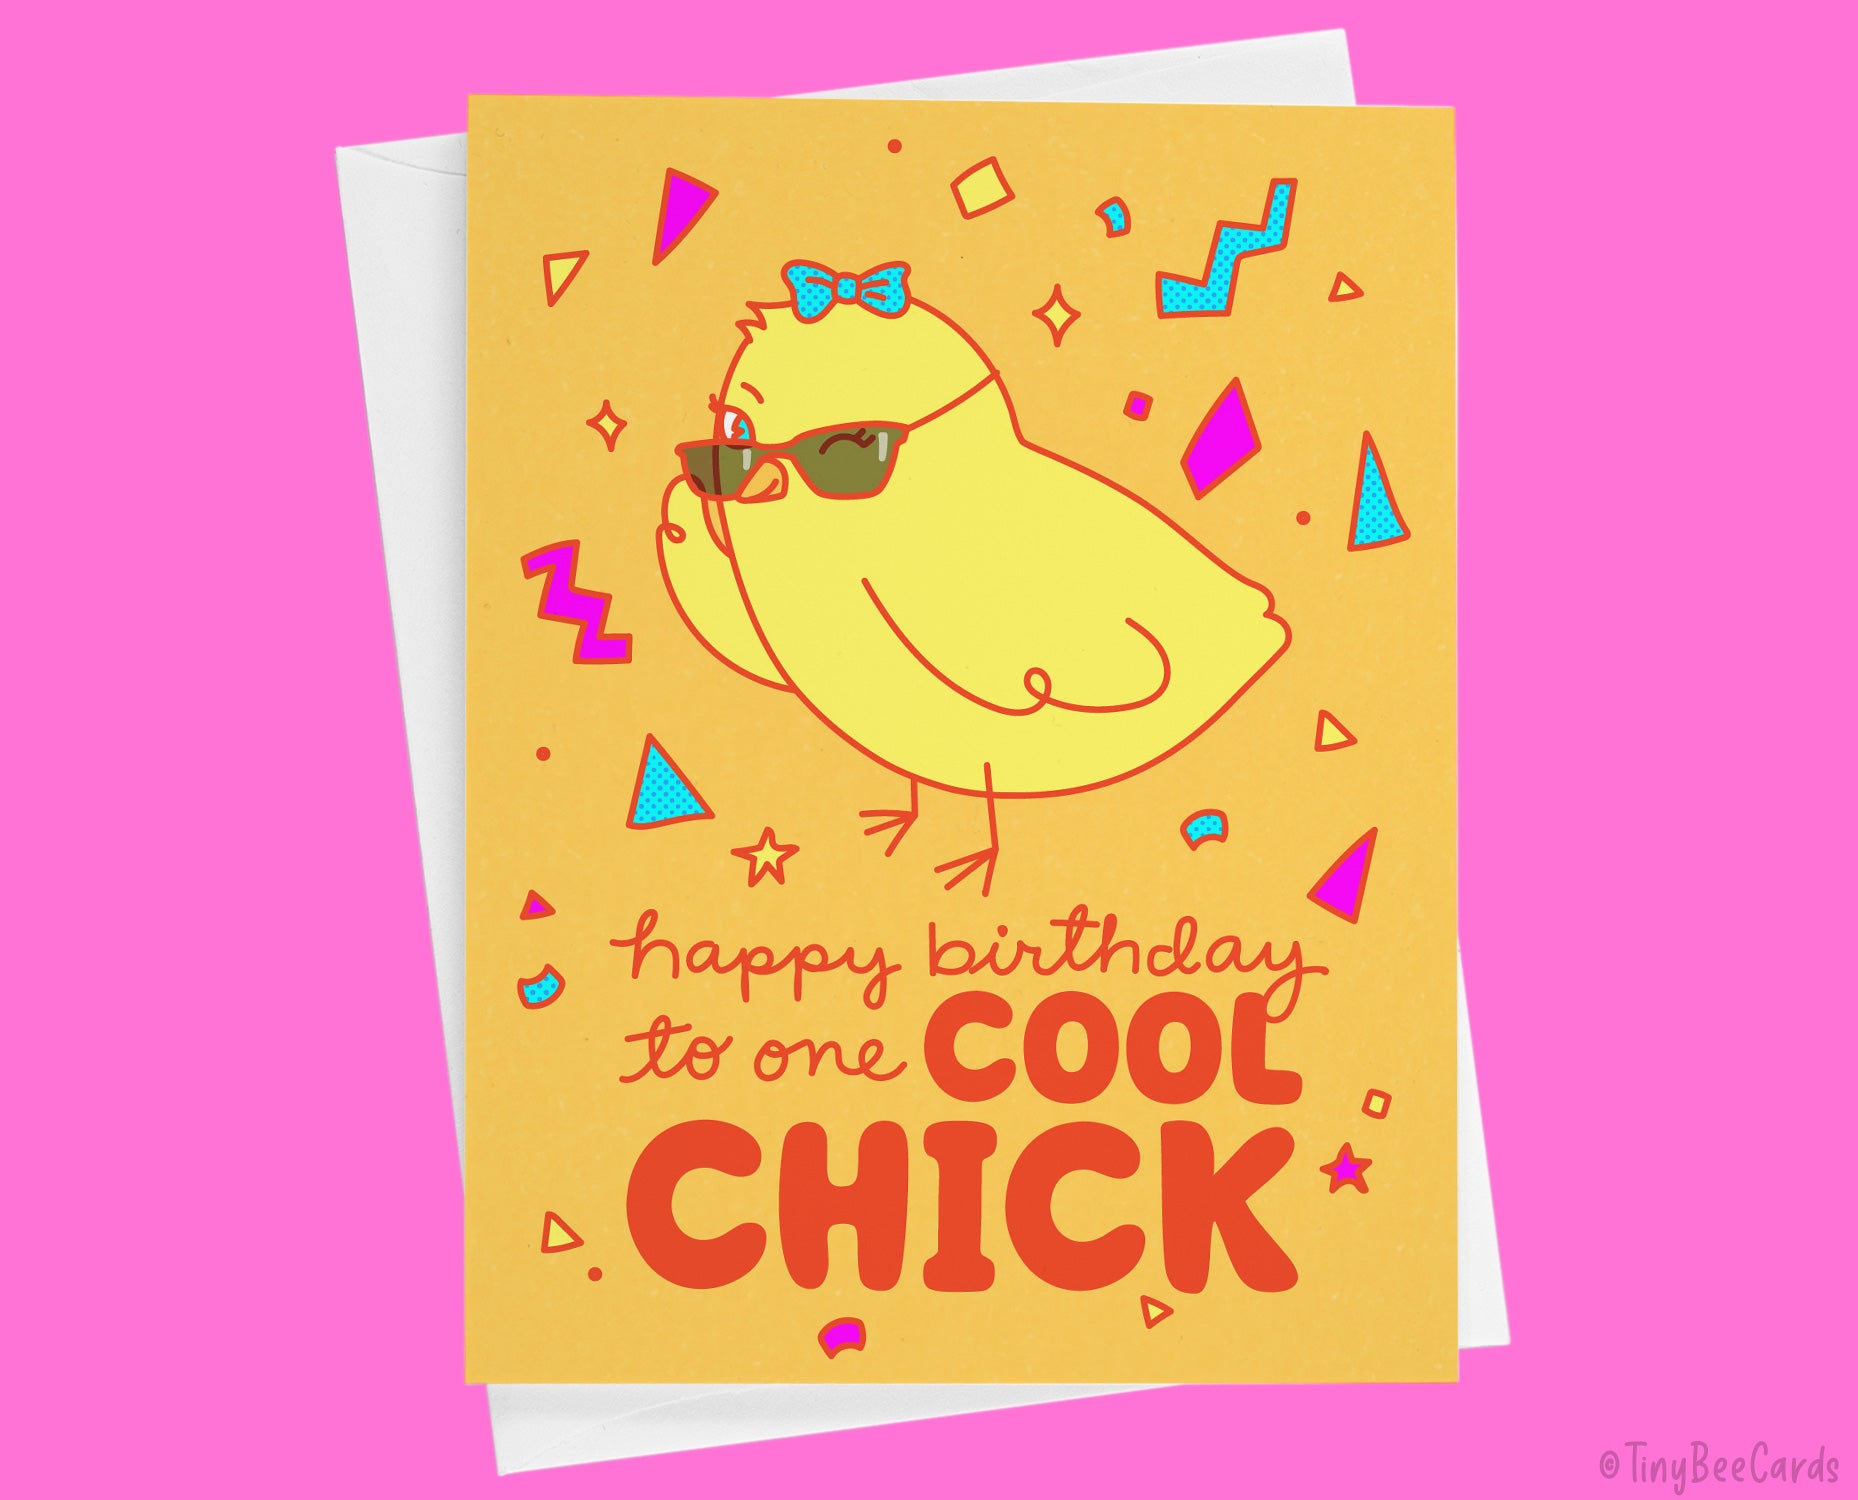 Funny Birthday Card For Her "Happy Birthday to One Cool Chick"